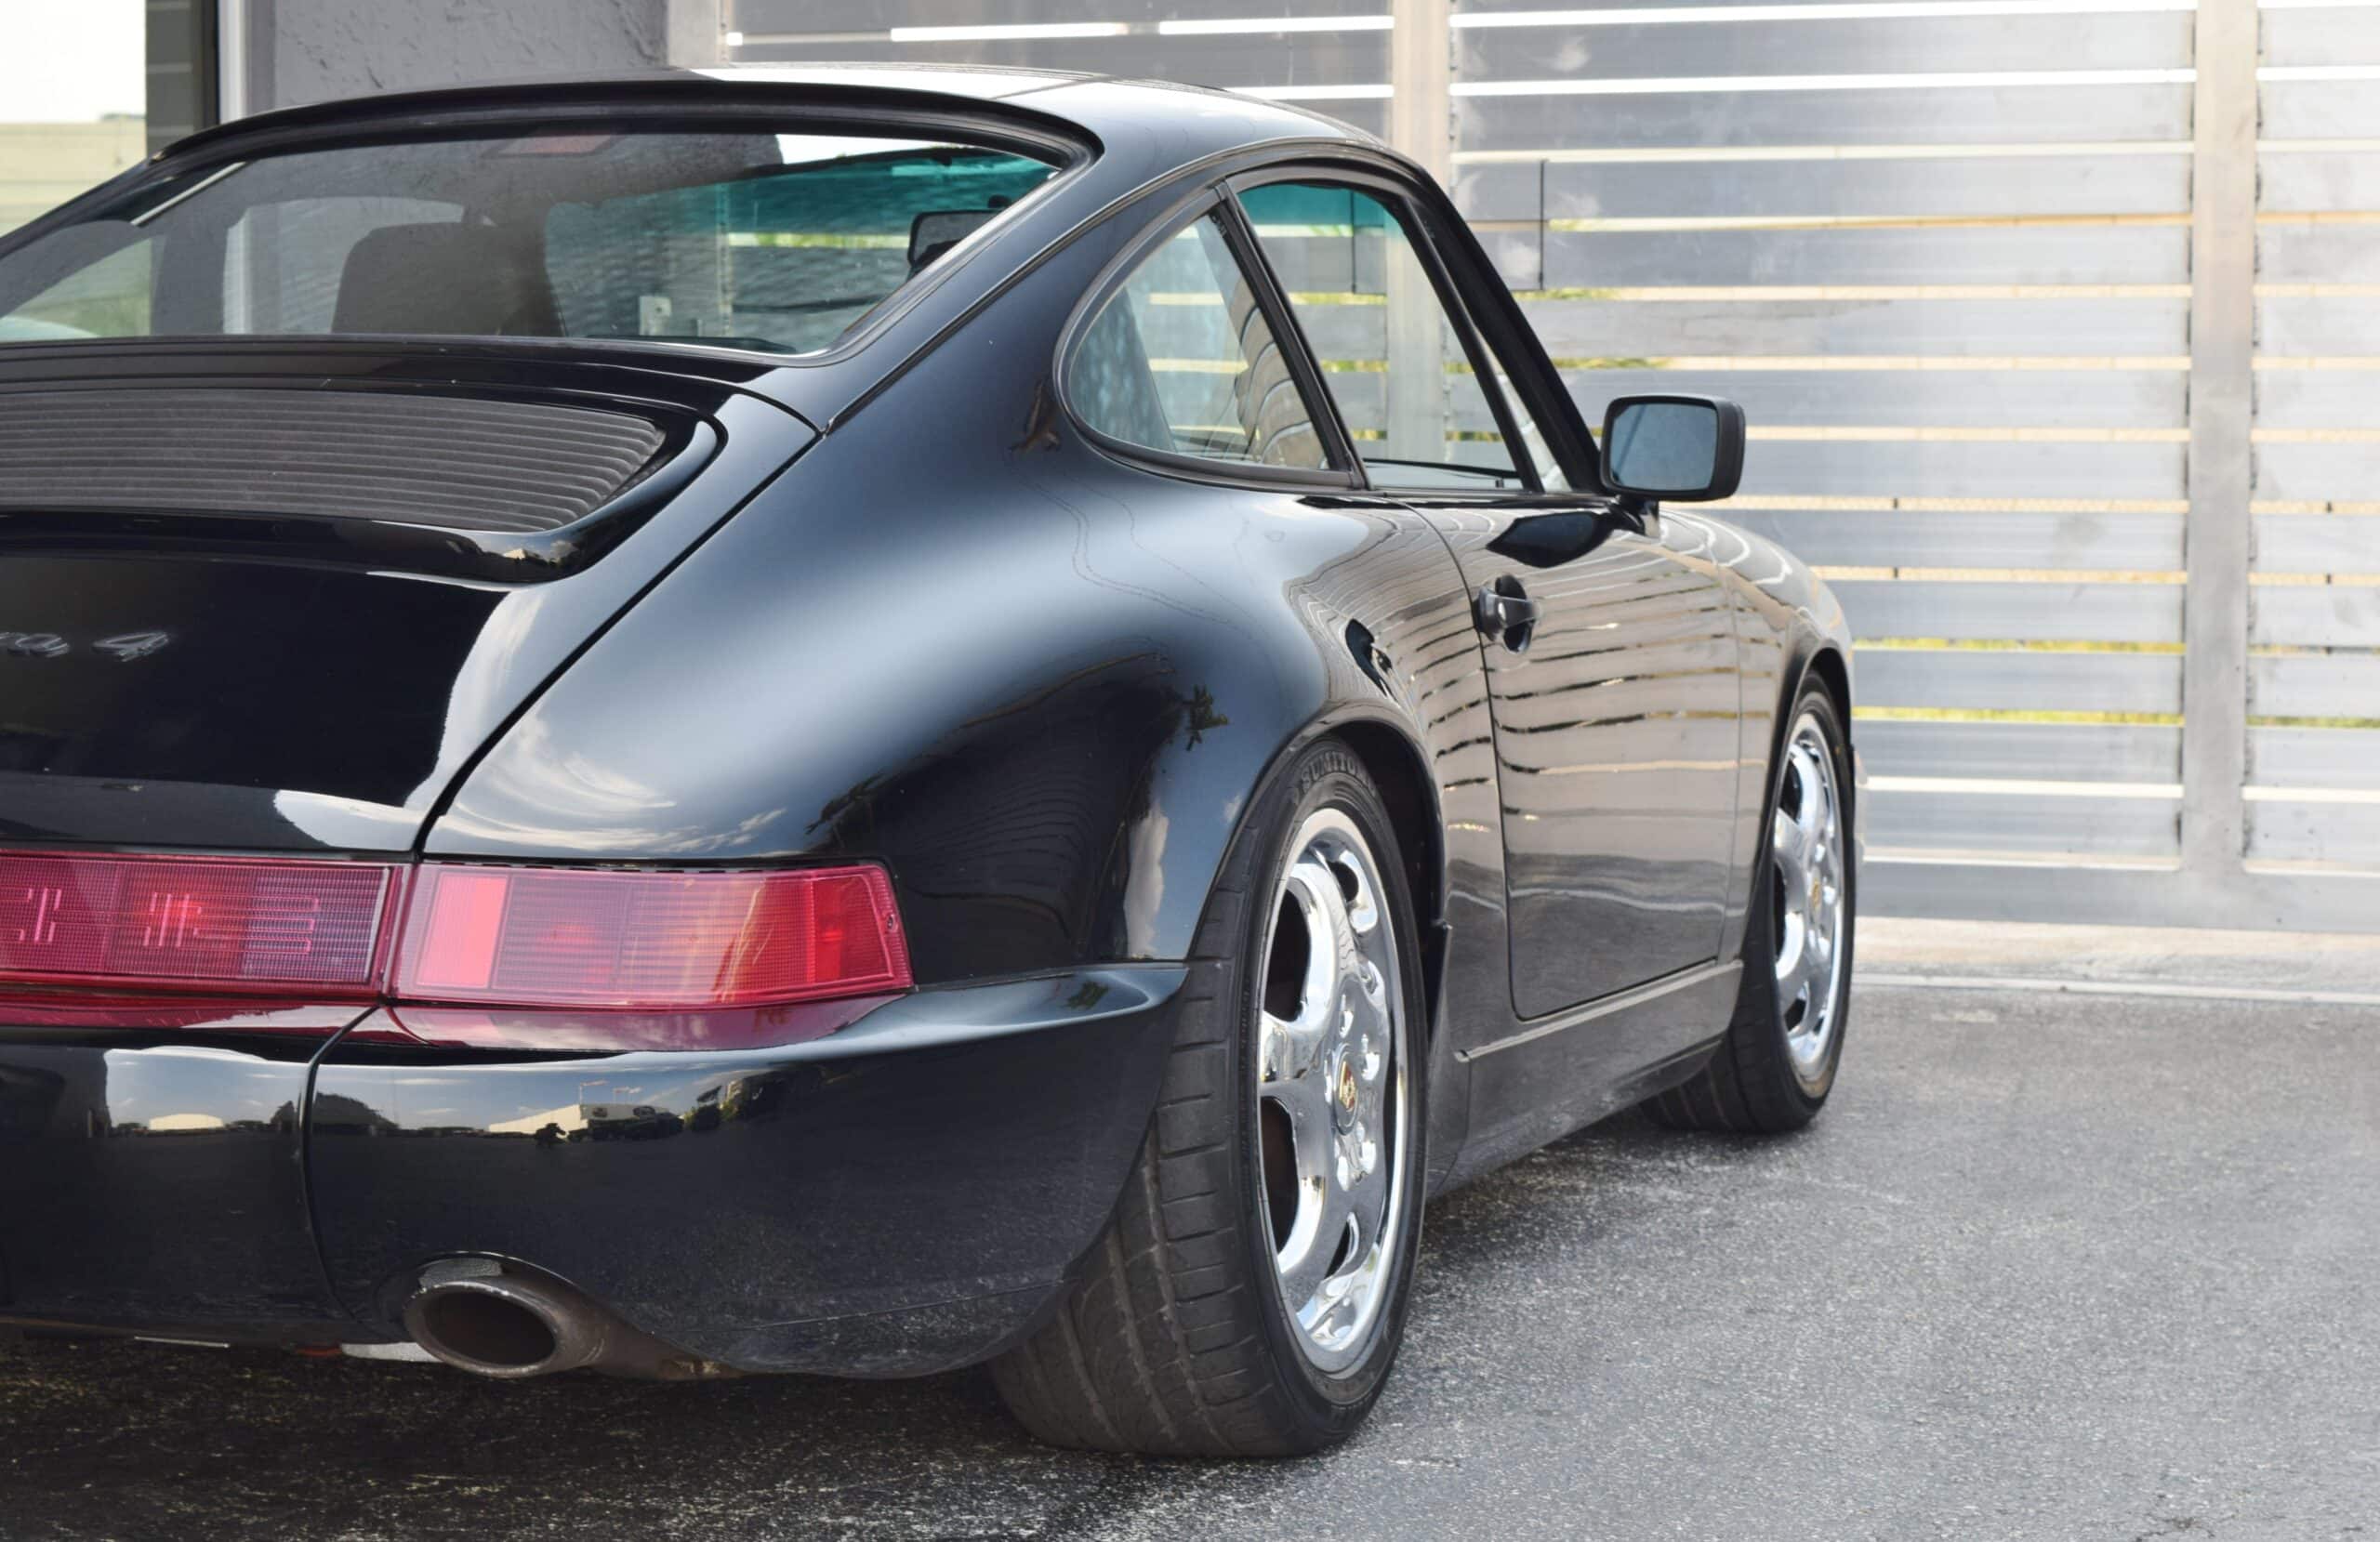 1991 Porsche 911 964 Carrera 4 Same owner for 27 years – Turbo Cup Wheels – 5 Speed – Extensive Service Records